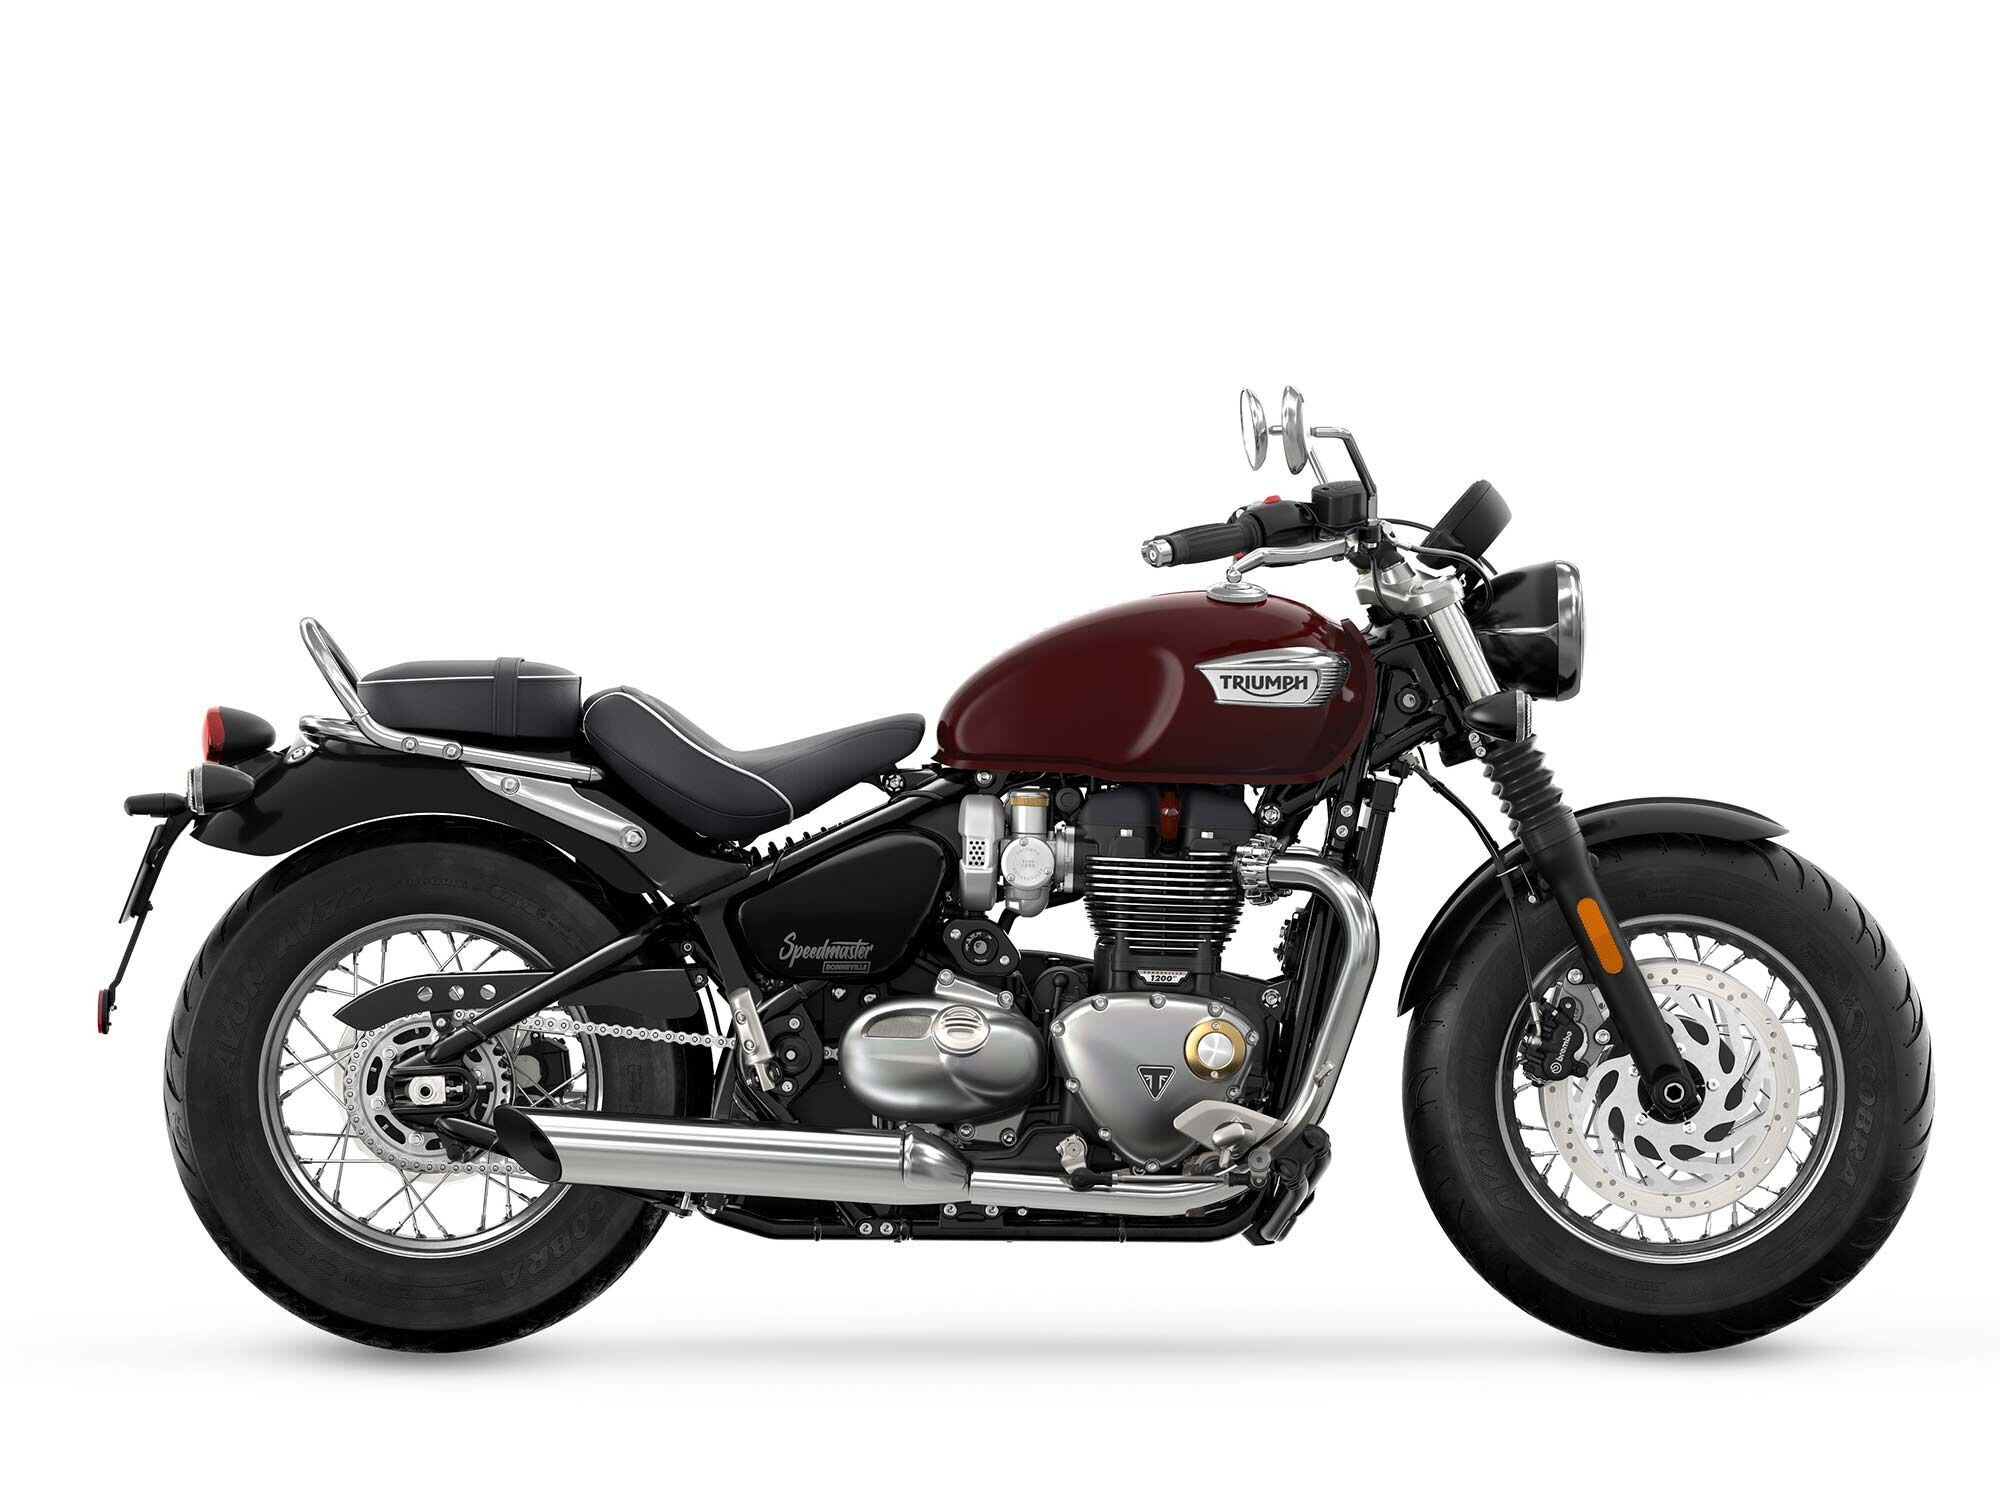 There are no changes to the 2023 Speedmaster, though you will see a new Cordovan Red paint option.